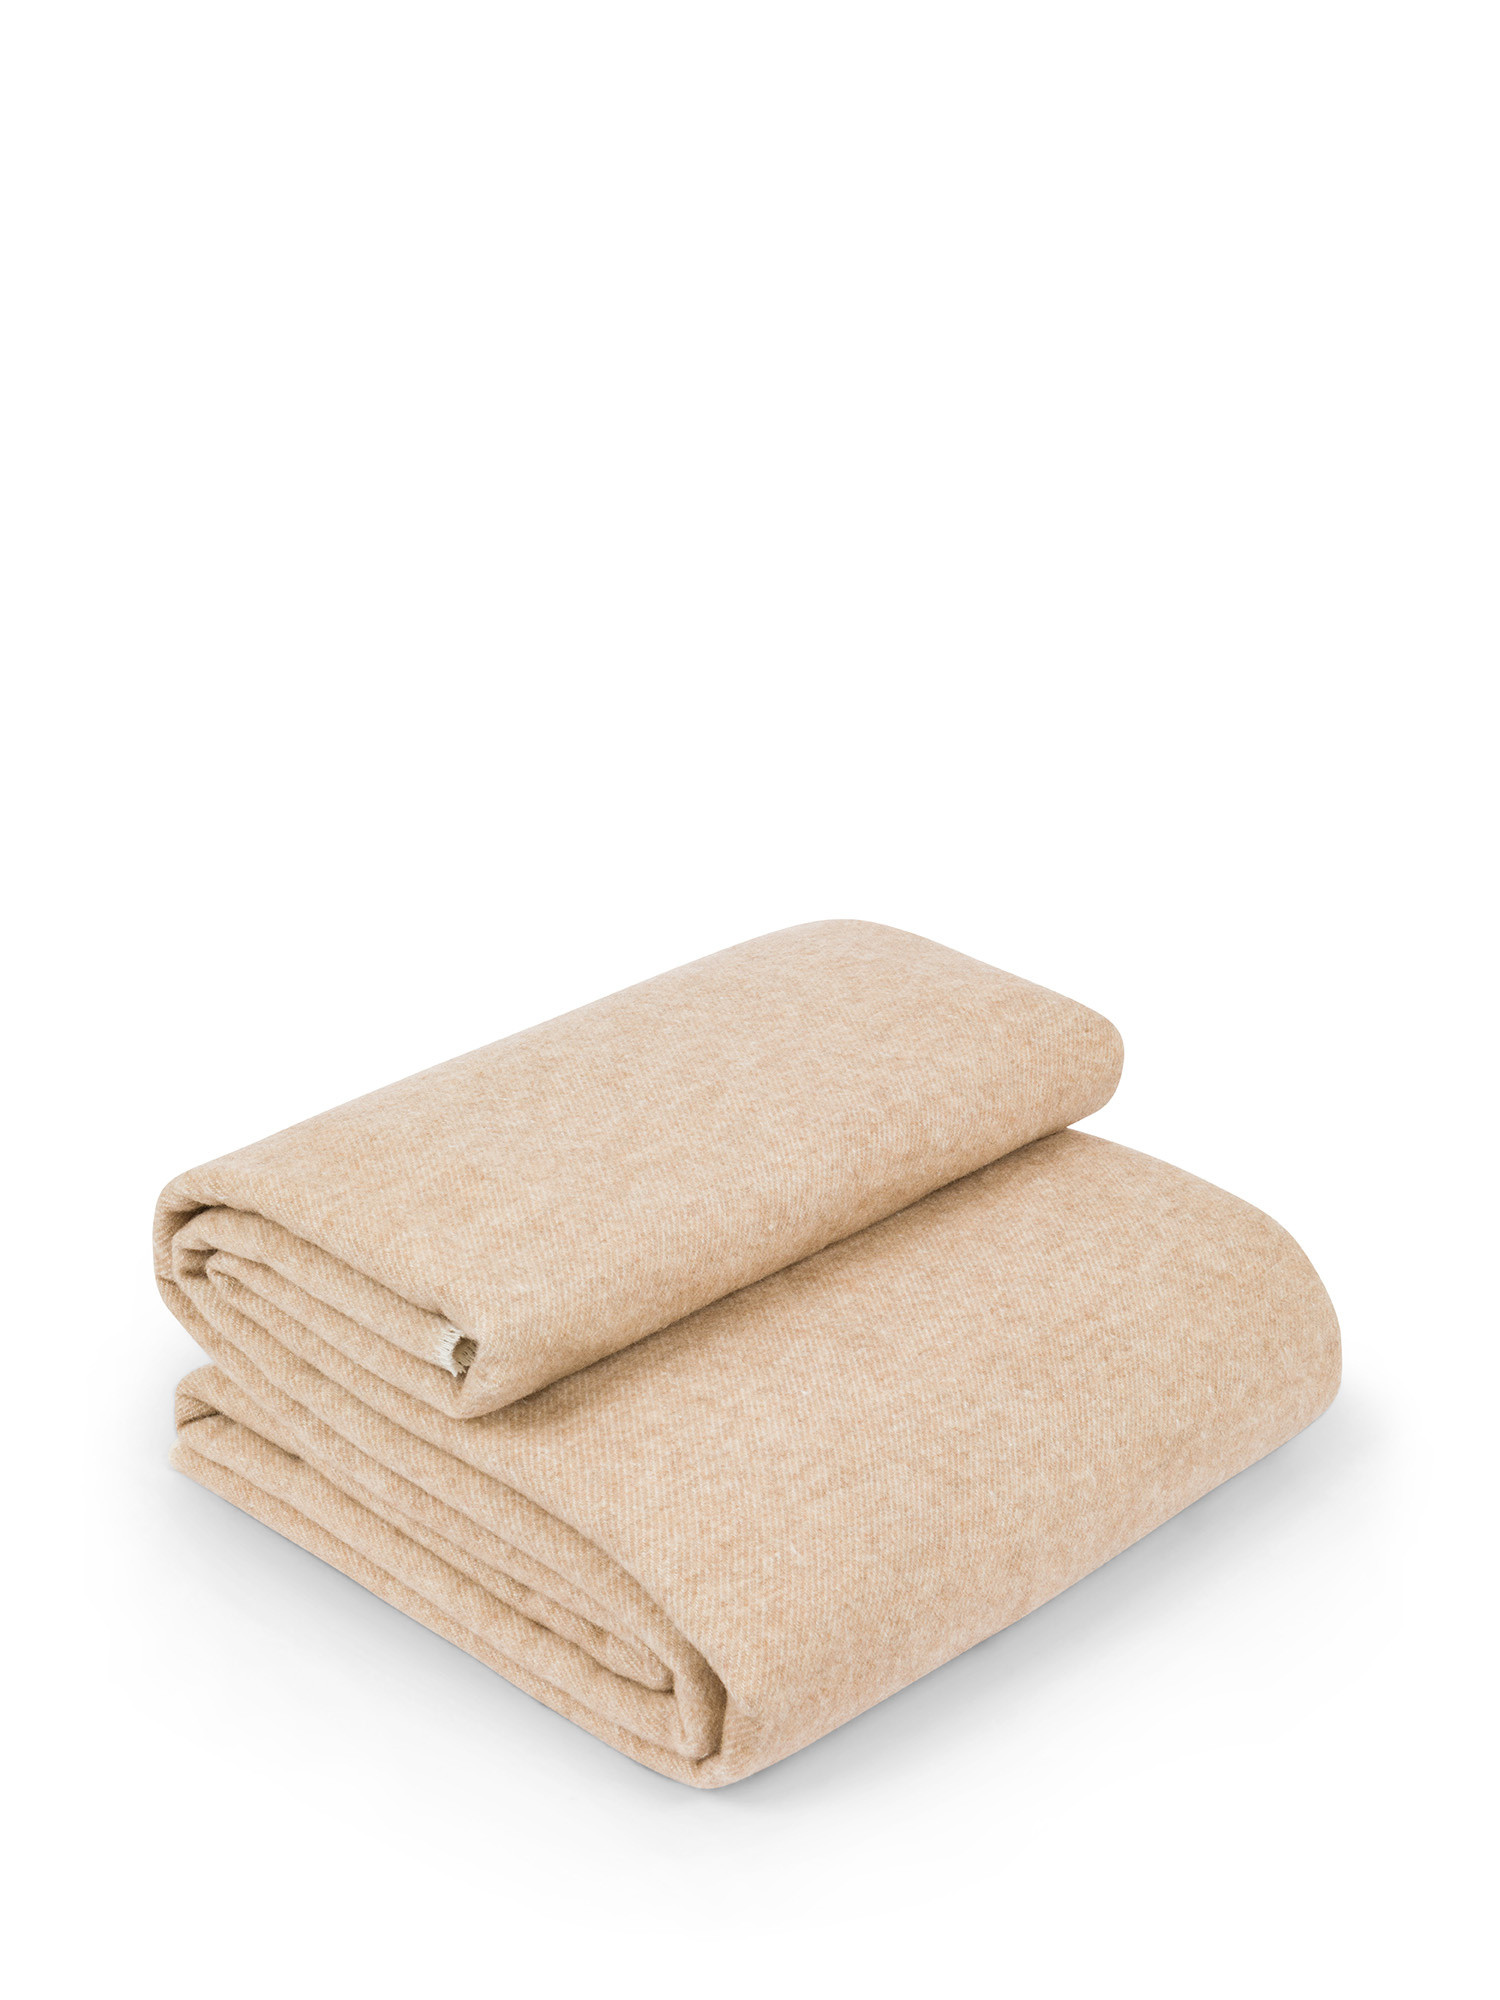 Wool and cotton blanket Portofino, Beige, large image number 0